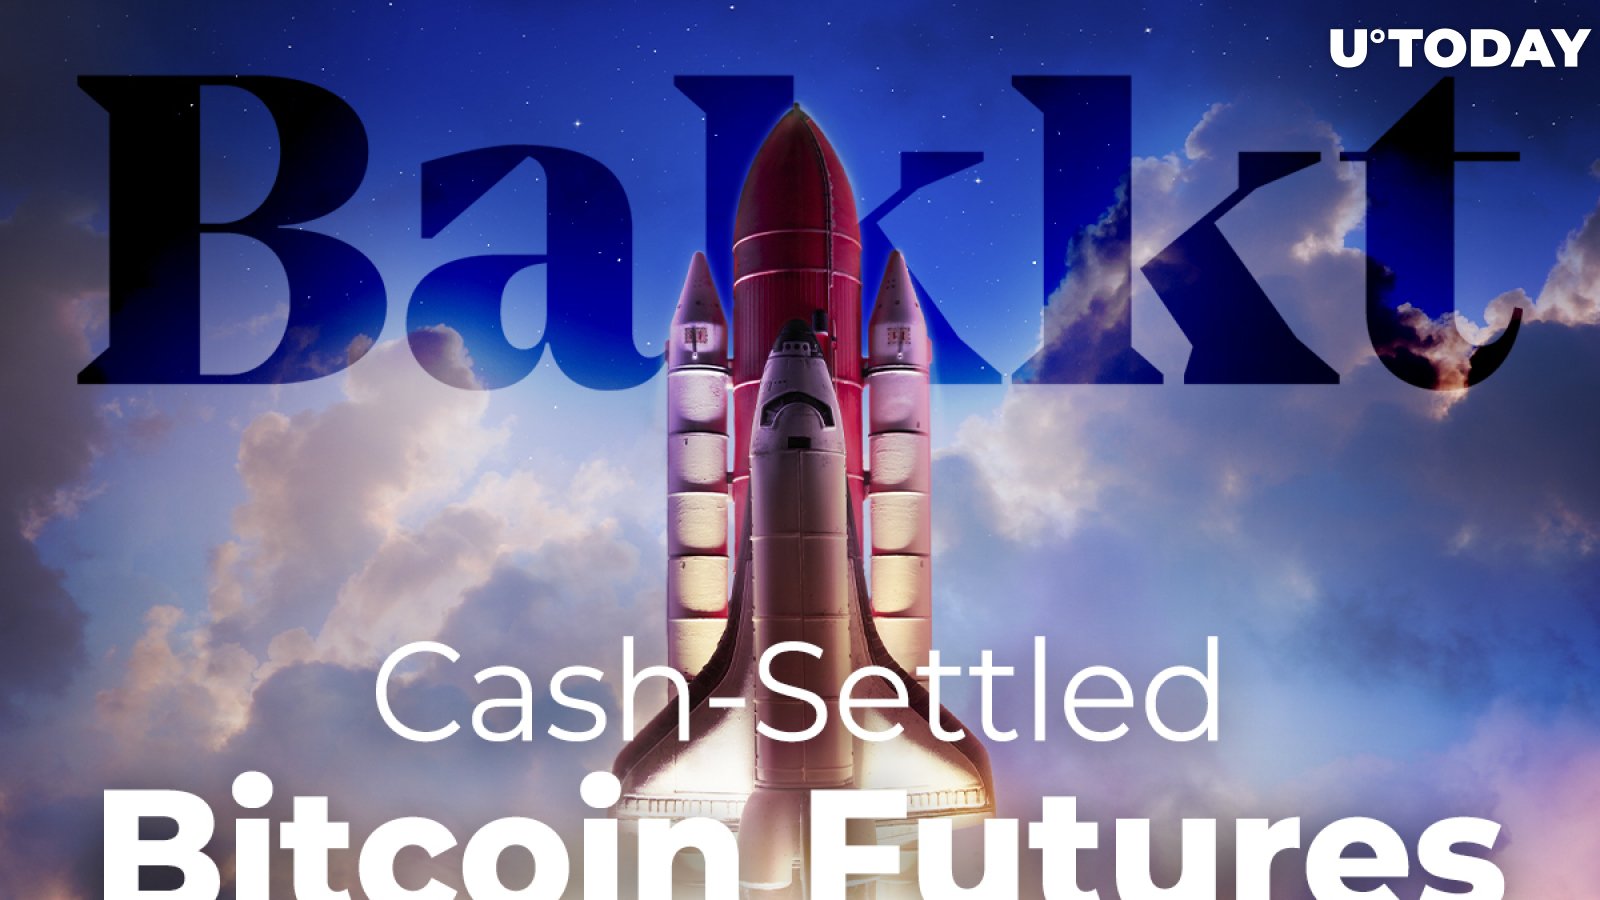 Bitcoin Futures That Are Settled in Cash to Be Launched by Bakkt in December